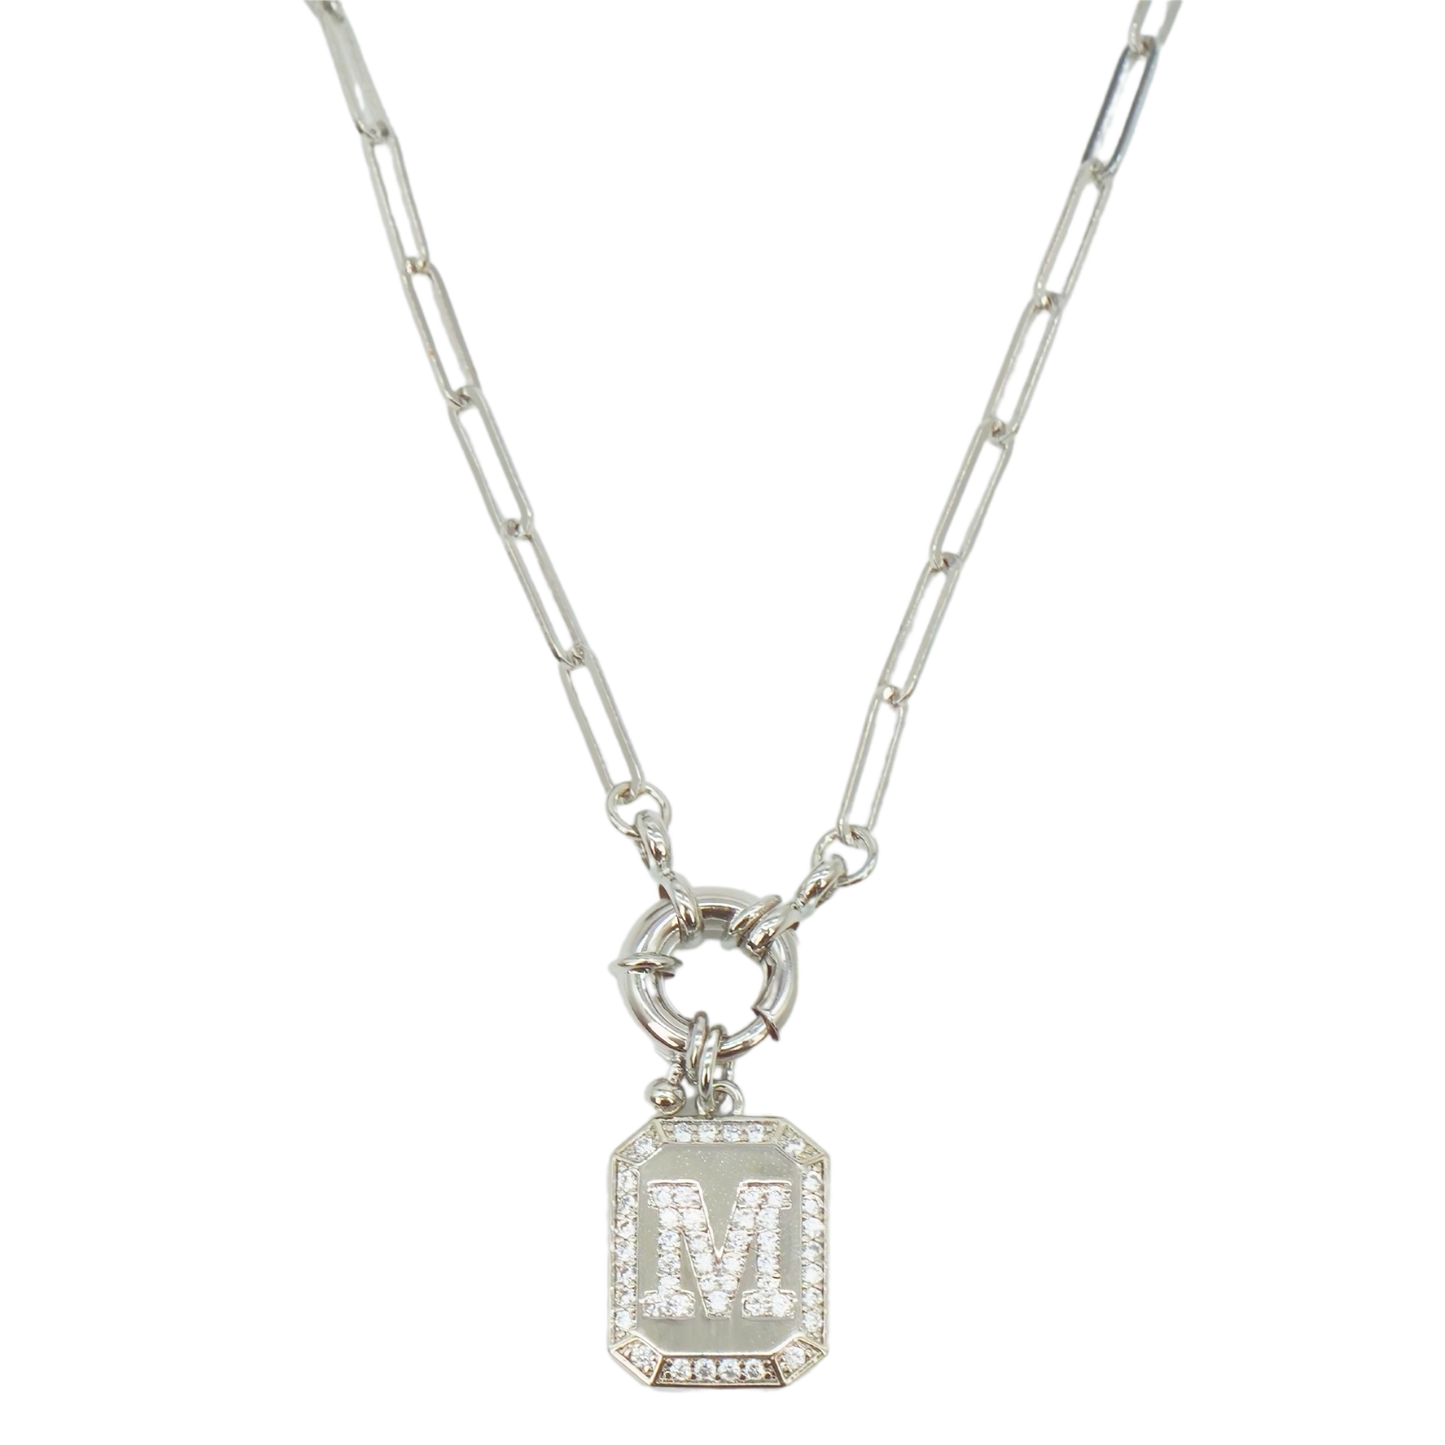 Initial Pendant Necklace with Paperclip Chain